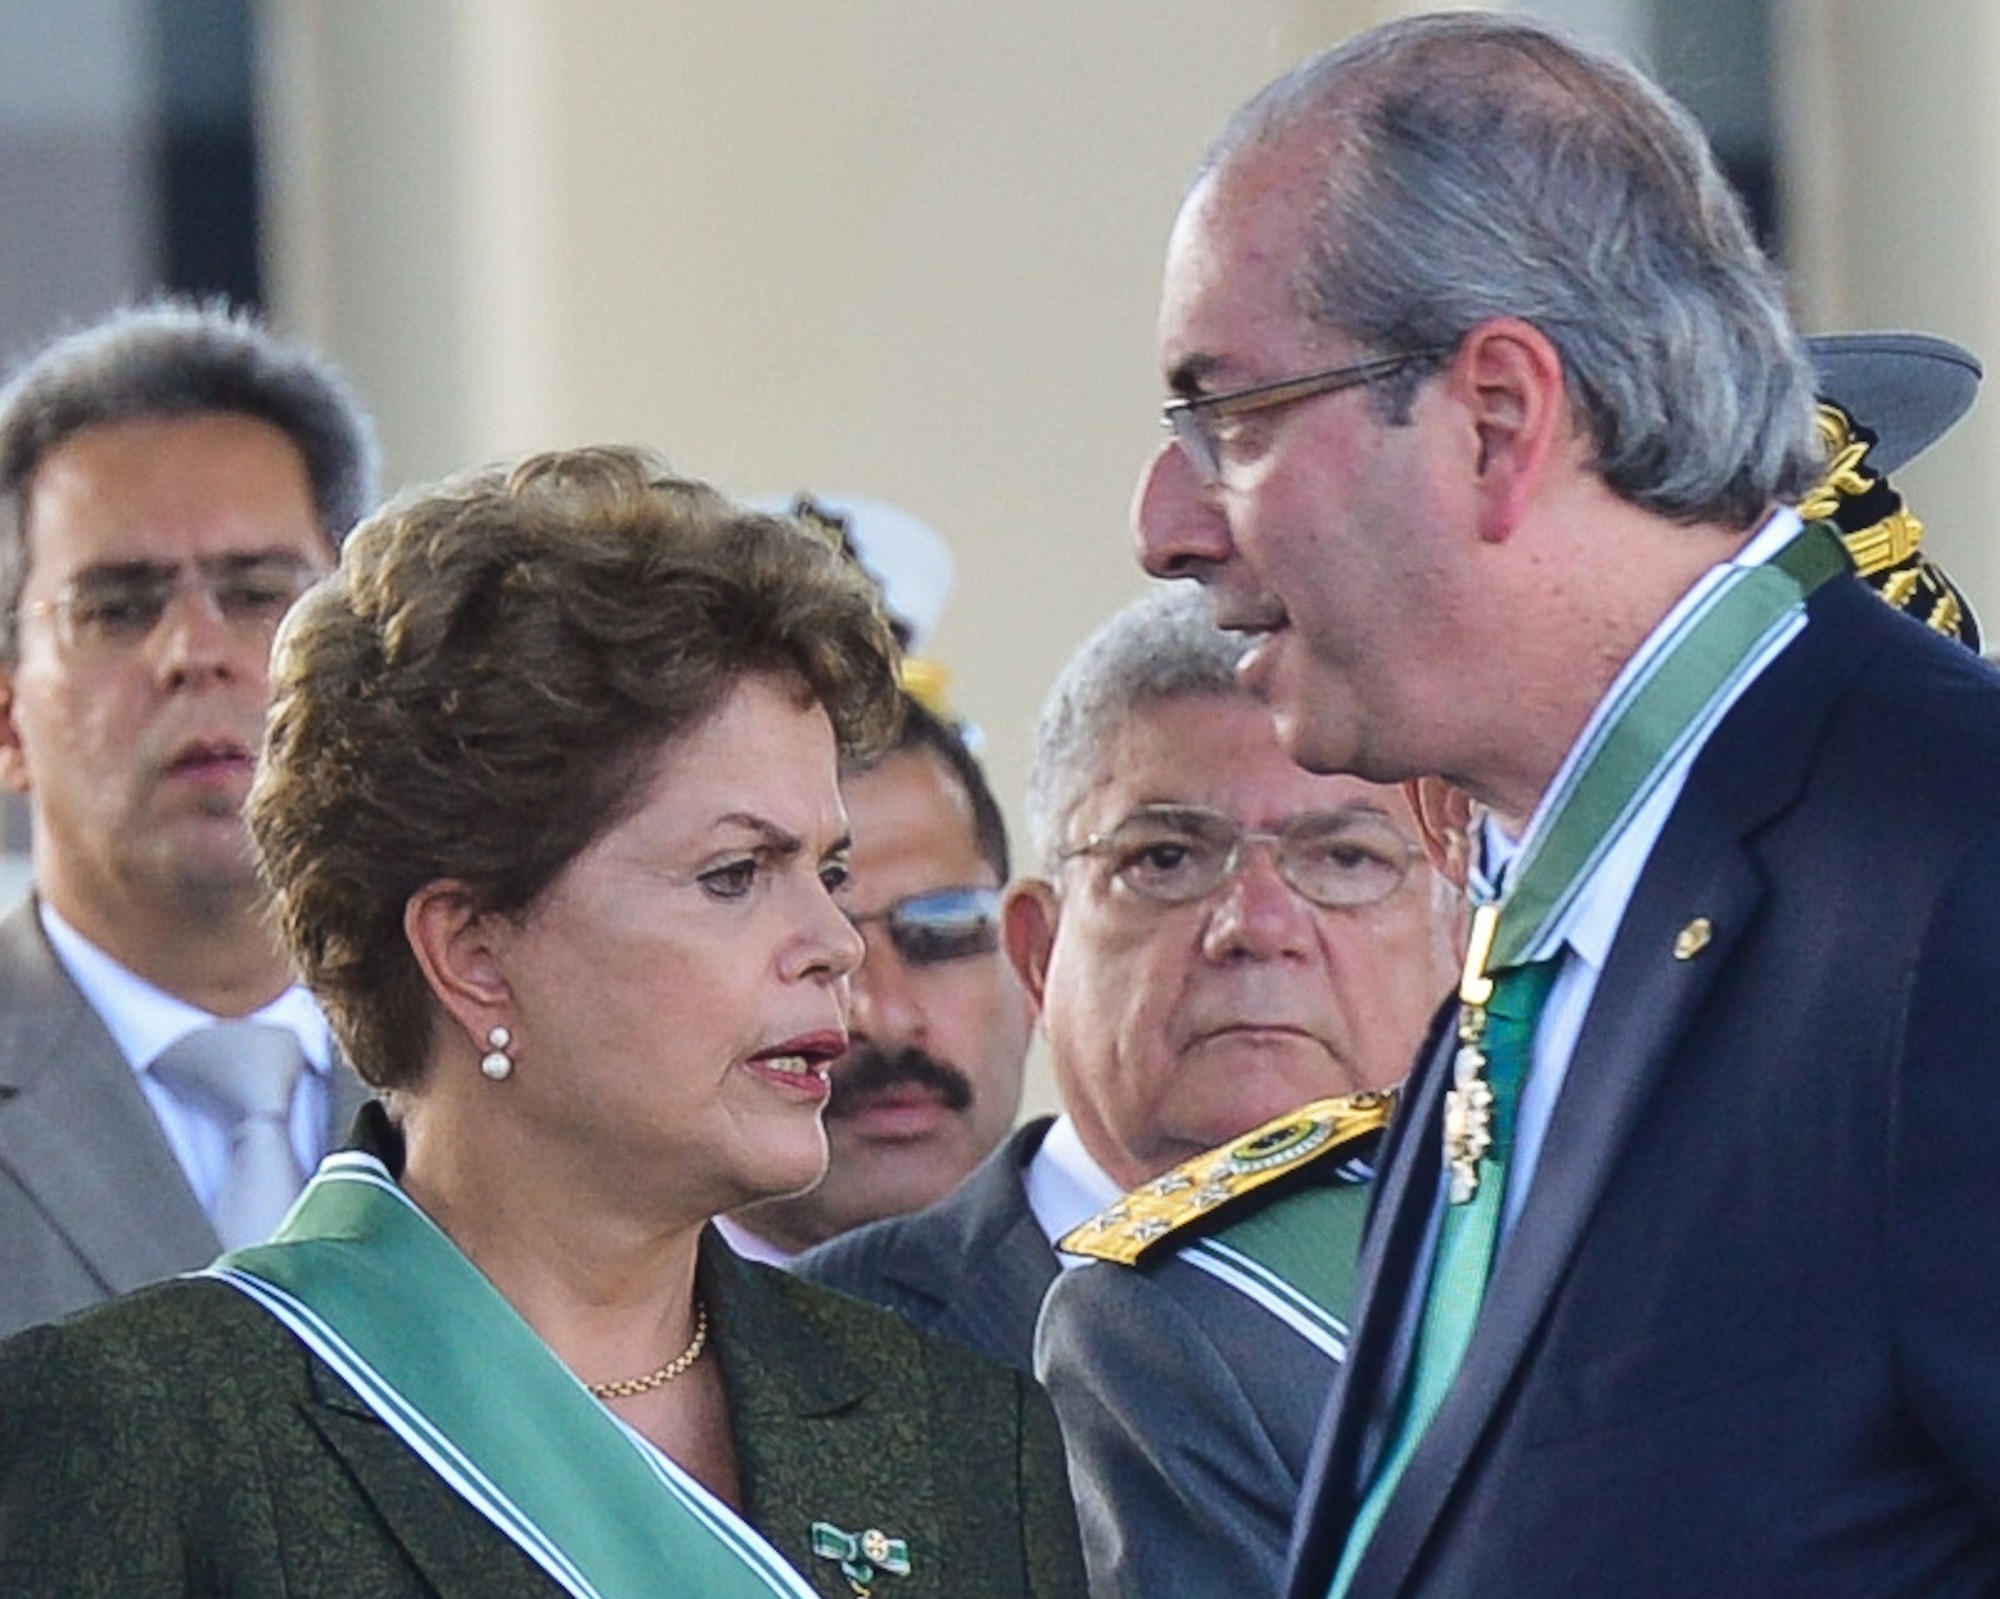 Congress in Brazil Returns to Impeachment and Corruption